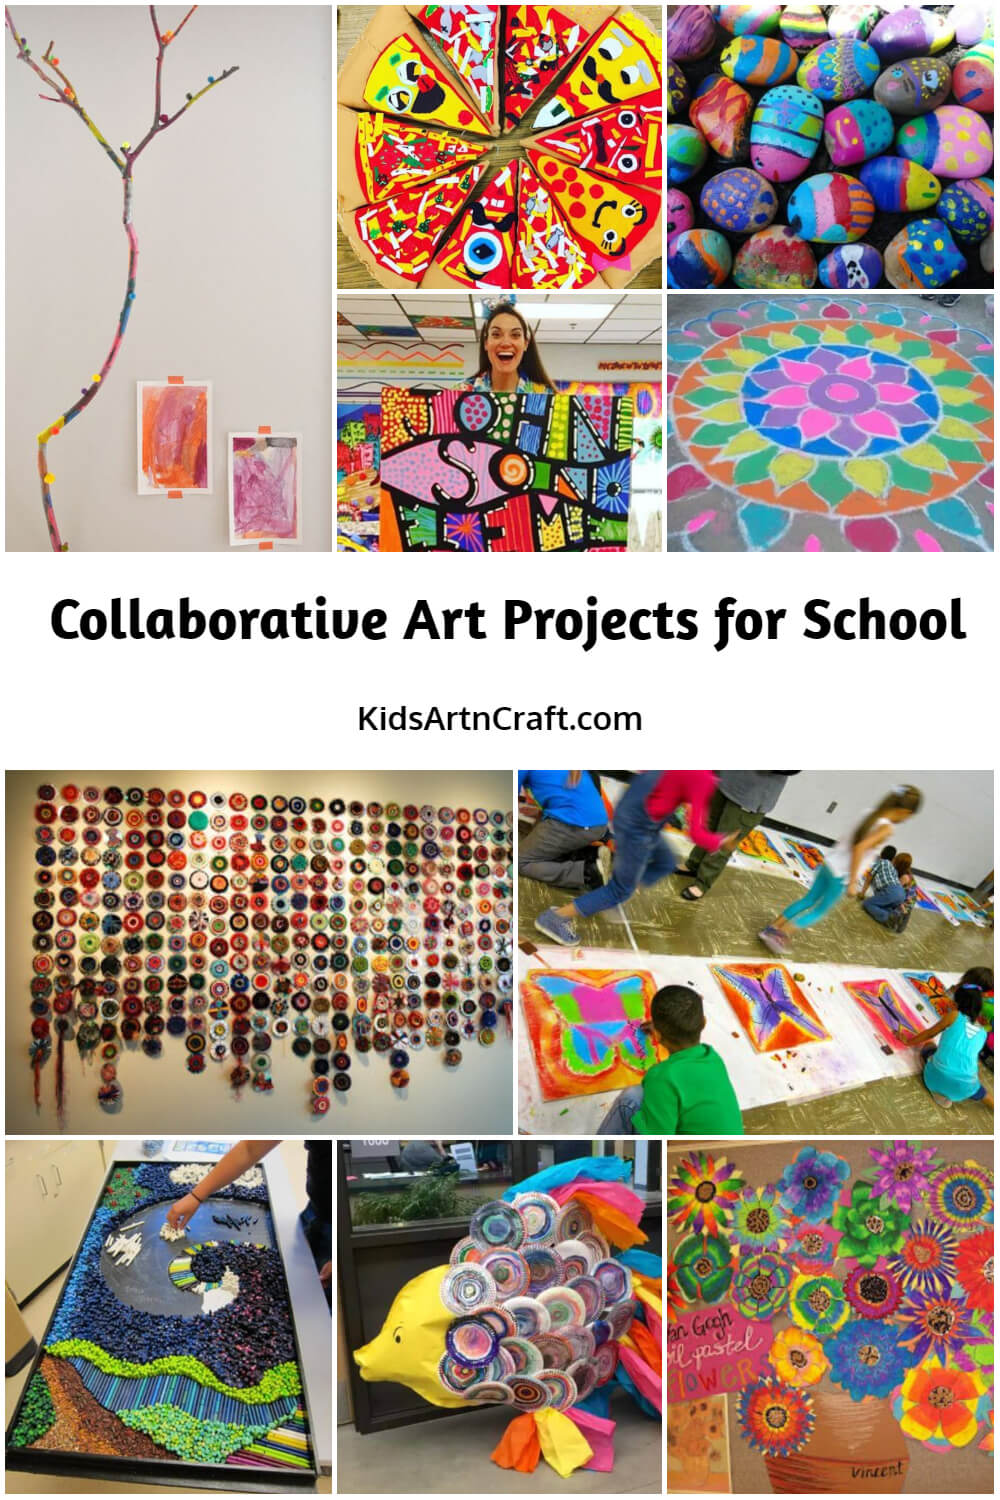  Collaborative Art Projects for School